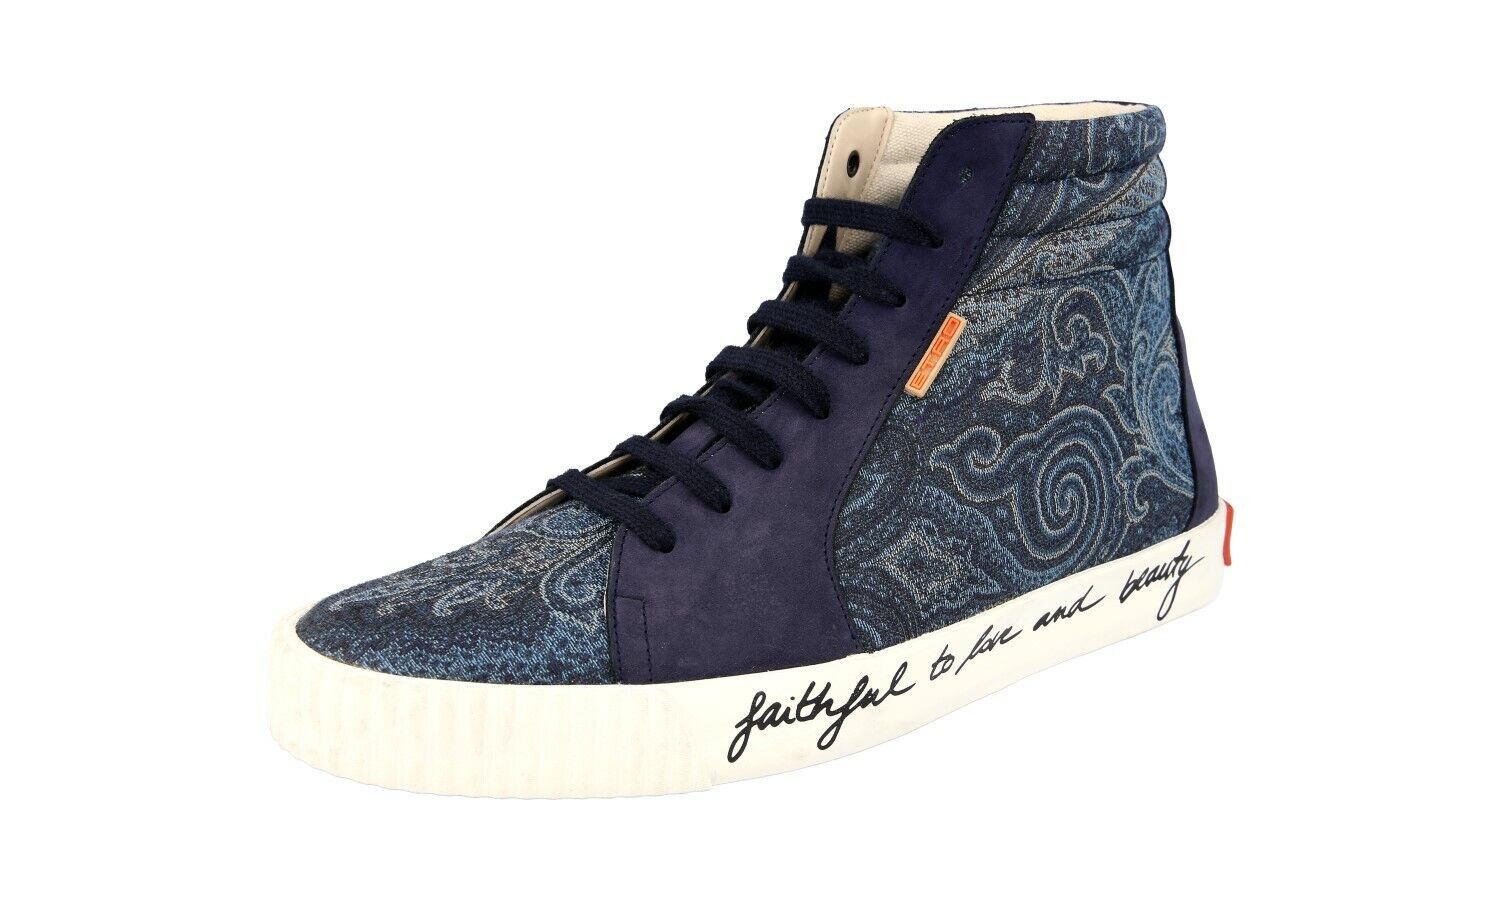 AUTH ETRO HIGH-TOP SNEAKERS SHOES 121403 603 0200 BLUE SUEDE US 11 EU 44  44,5